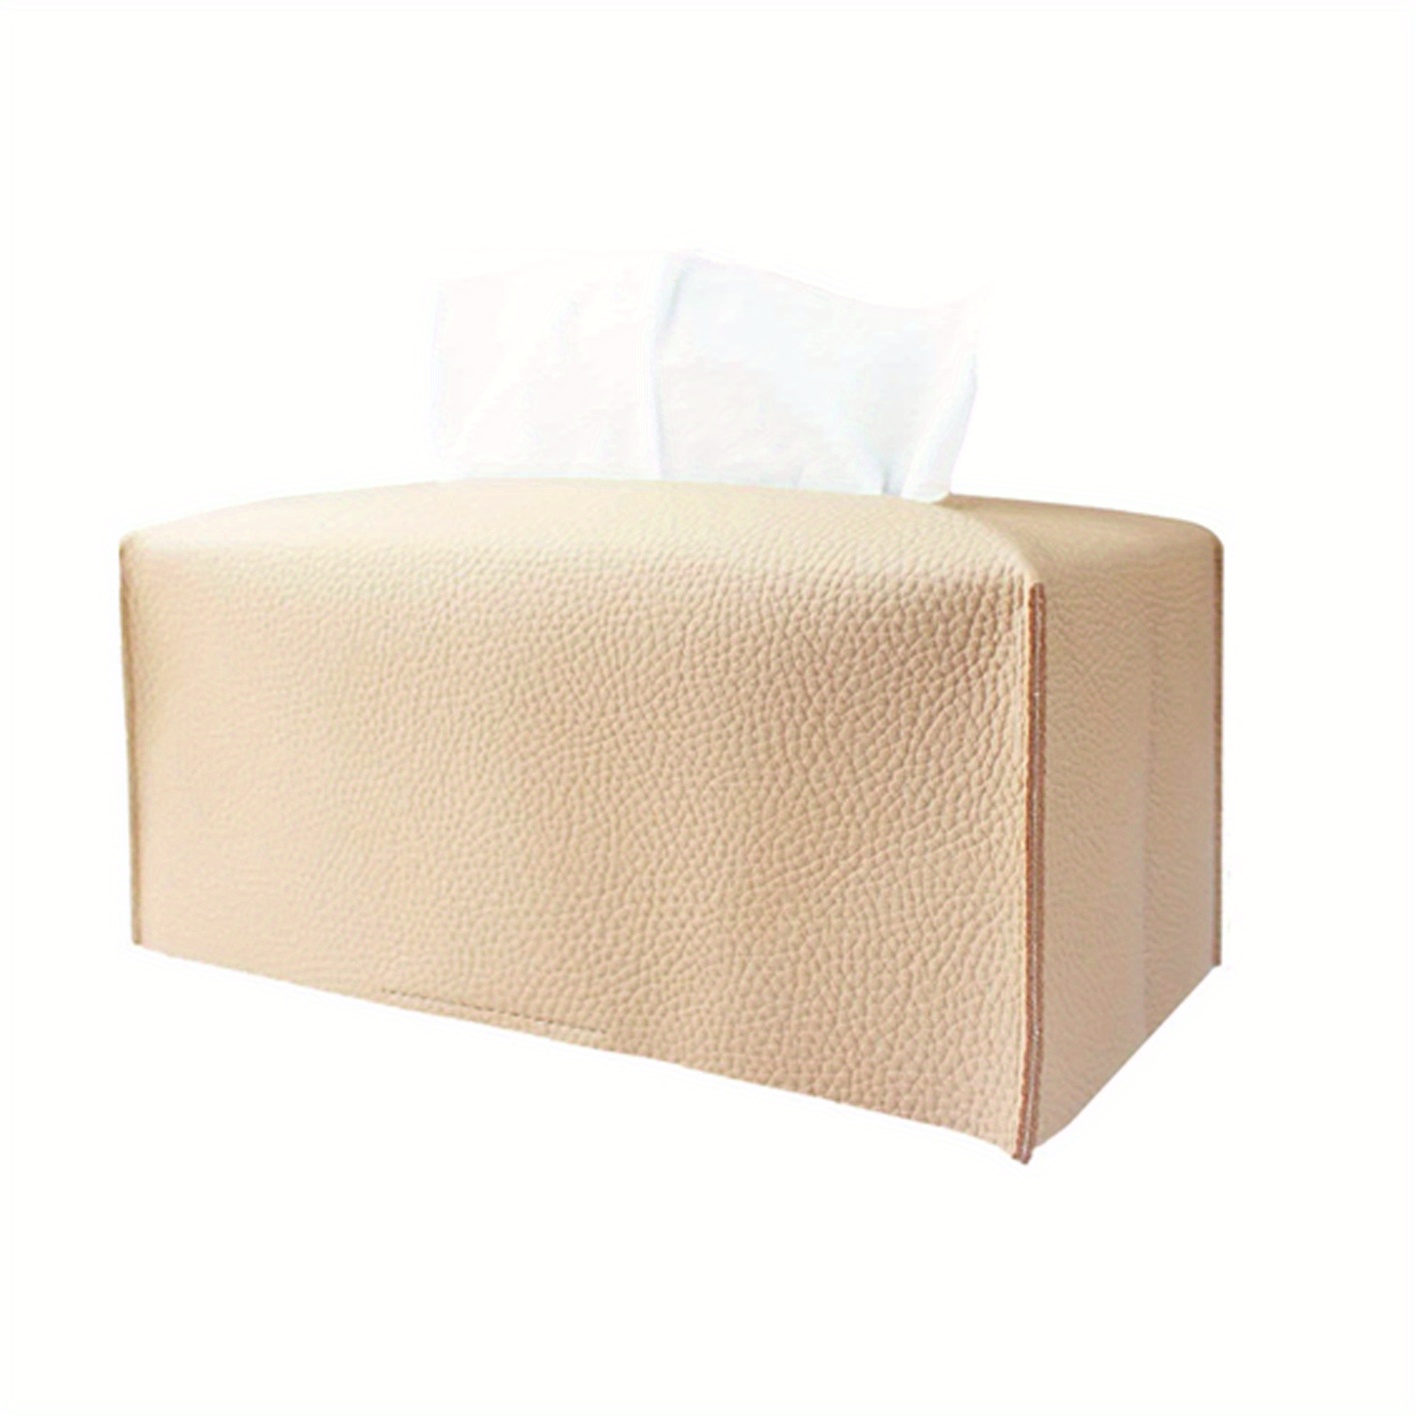  Stylish Tissue Box Cloth Tissue Covers Multifunction Tissue Box  and Car Tissue Box for Vanity Countertop Bedroom Dresser Office End Table  Modern Tissue Box (Color : Multi-Colored, Size : Small_A) 